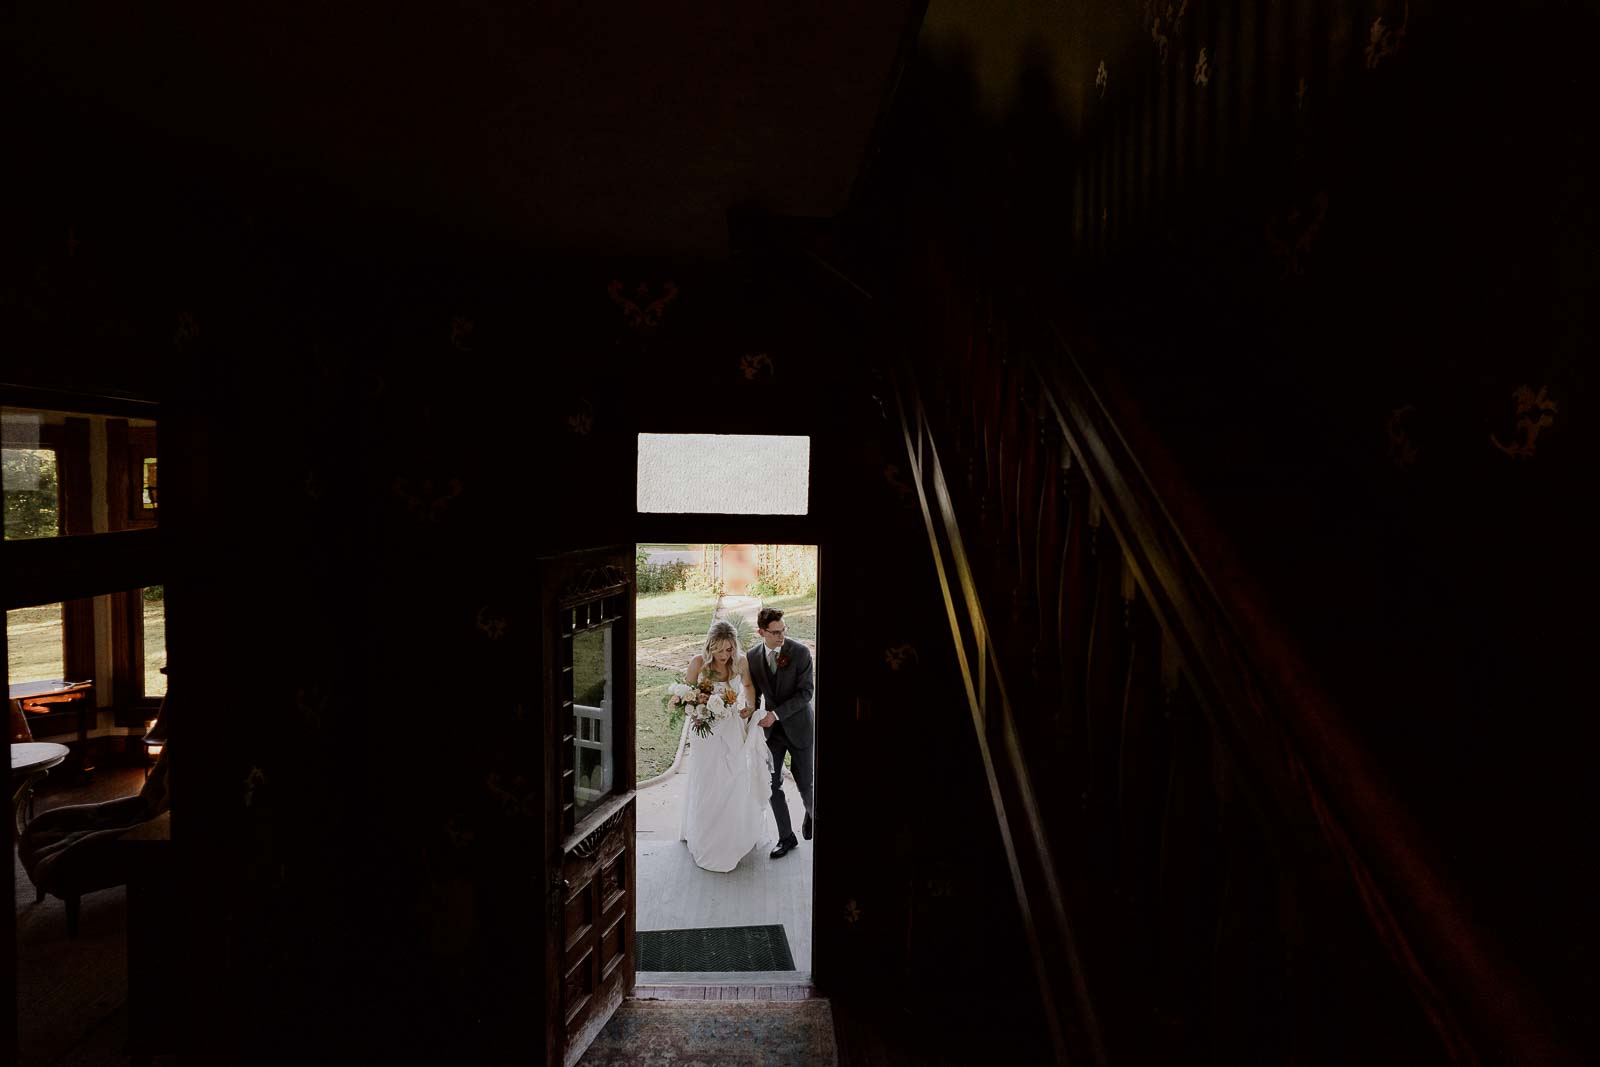 A series of three images as the just married couple enter the old house